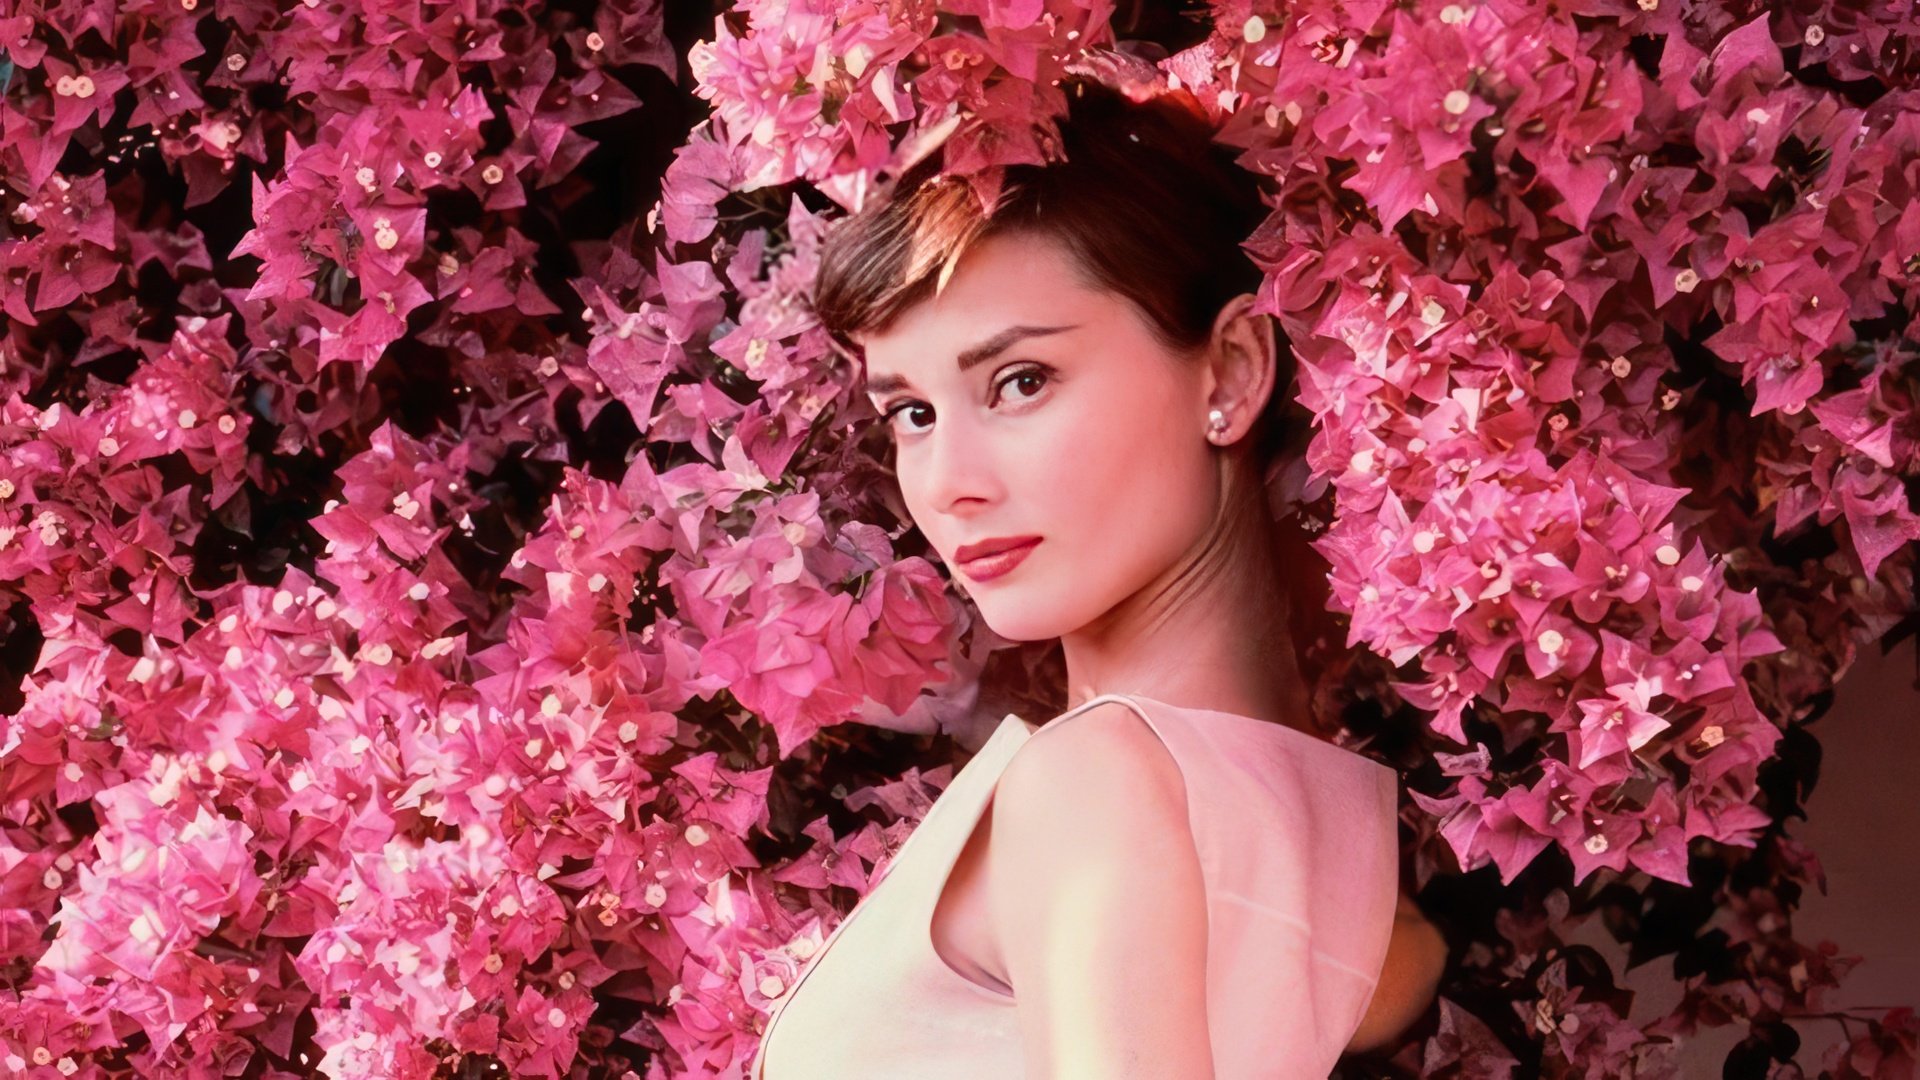 Audrey Hepburn charmed everyone with her charisma